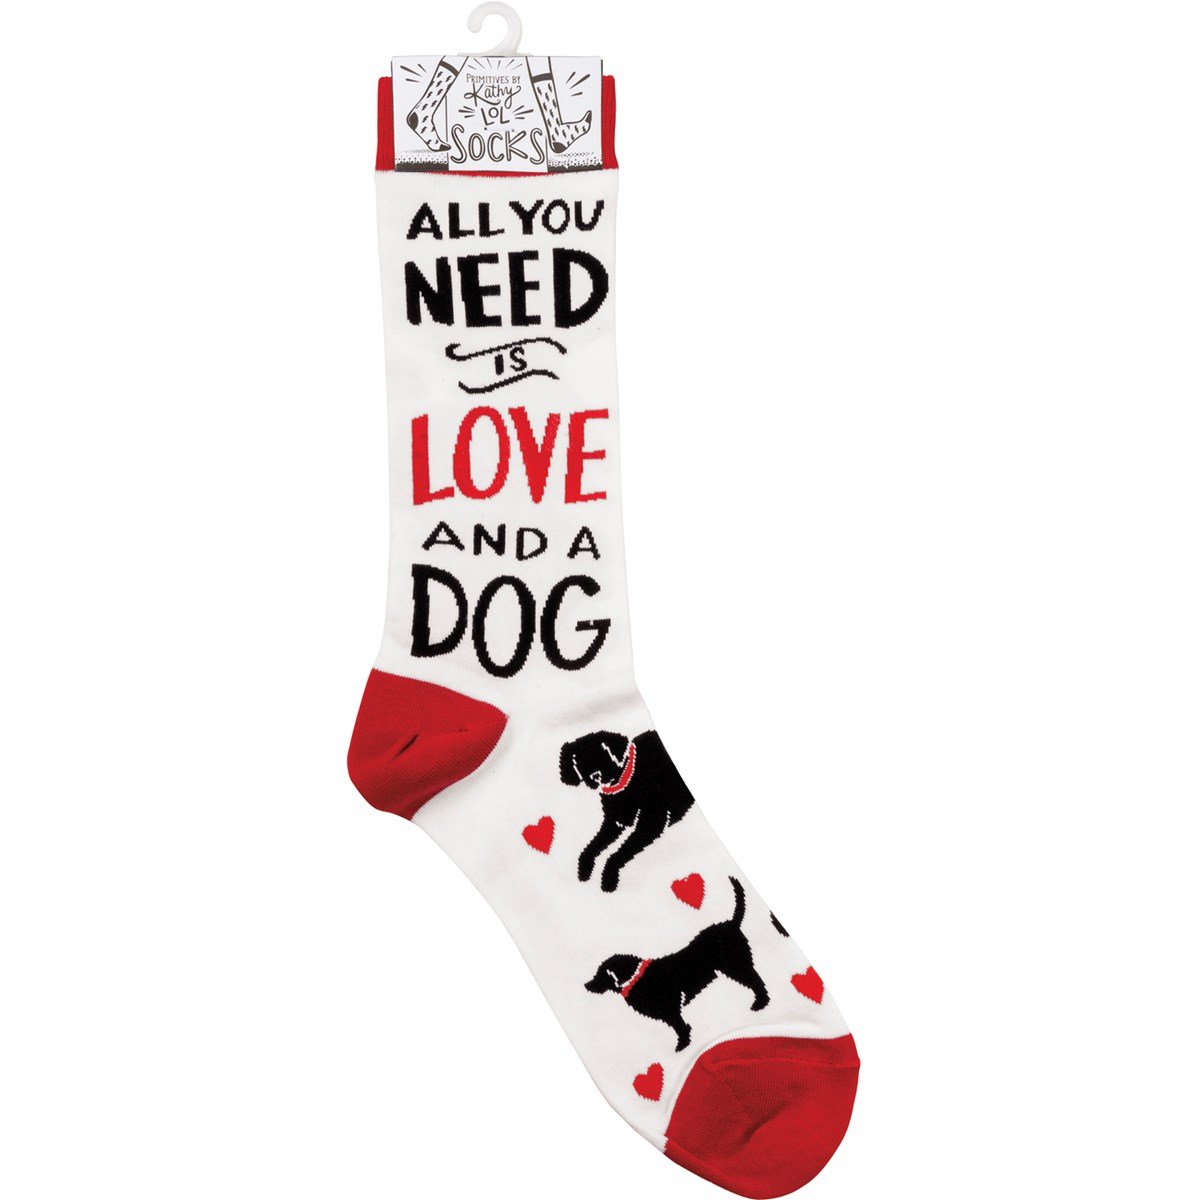 All you Need Is Love And A Dog Socks - Cotton, Nylon, Spandex